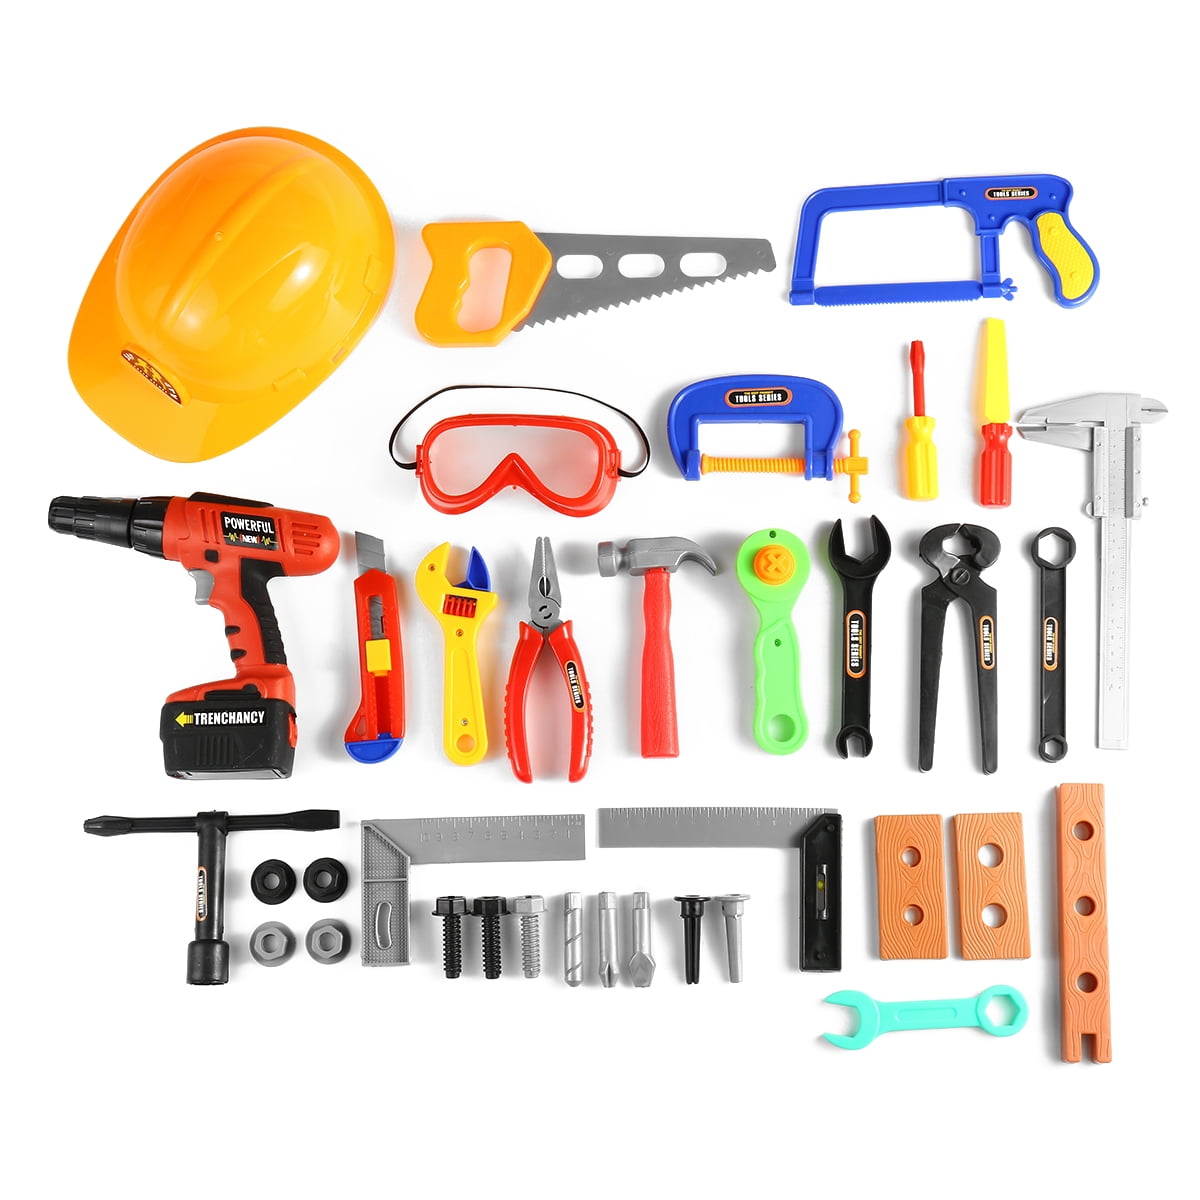 32pcs Repair Tools Toy Pretend Play Toy Set Playset Construction Toy for Kids 